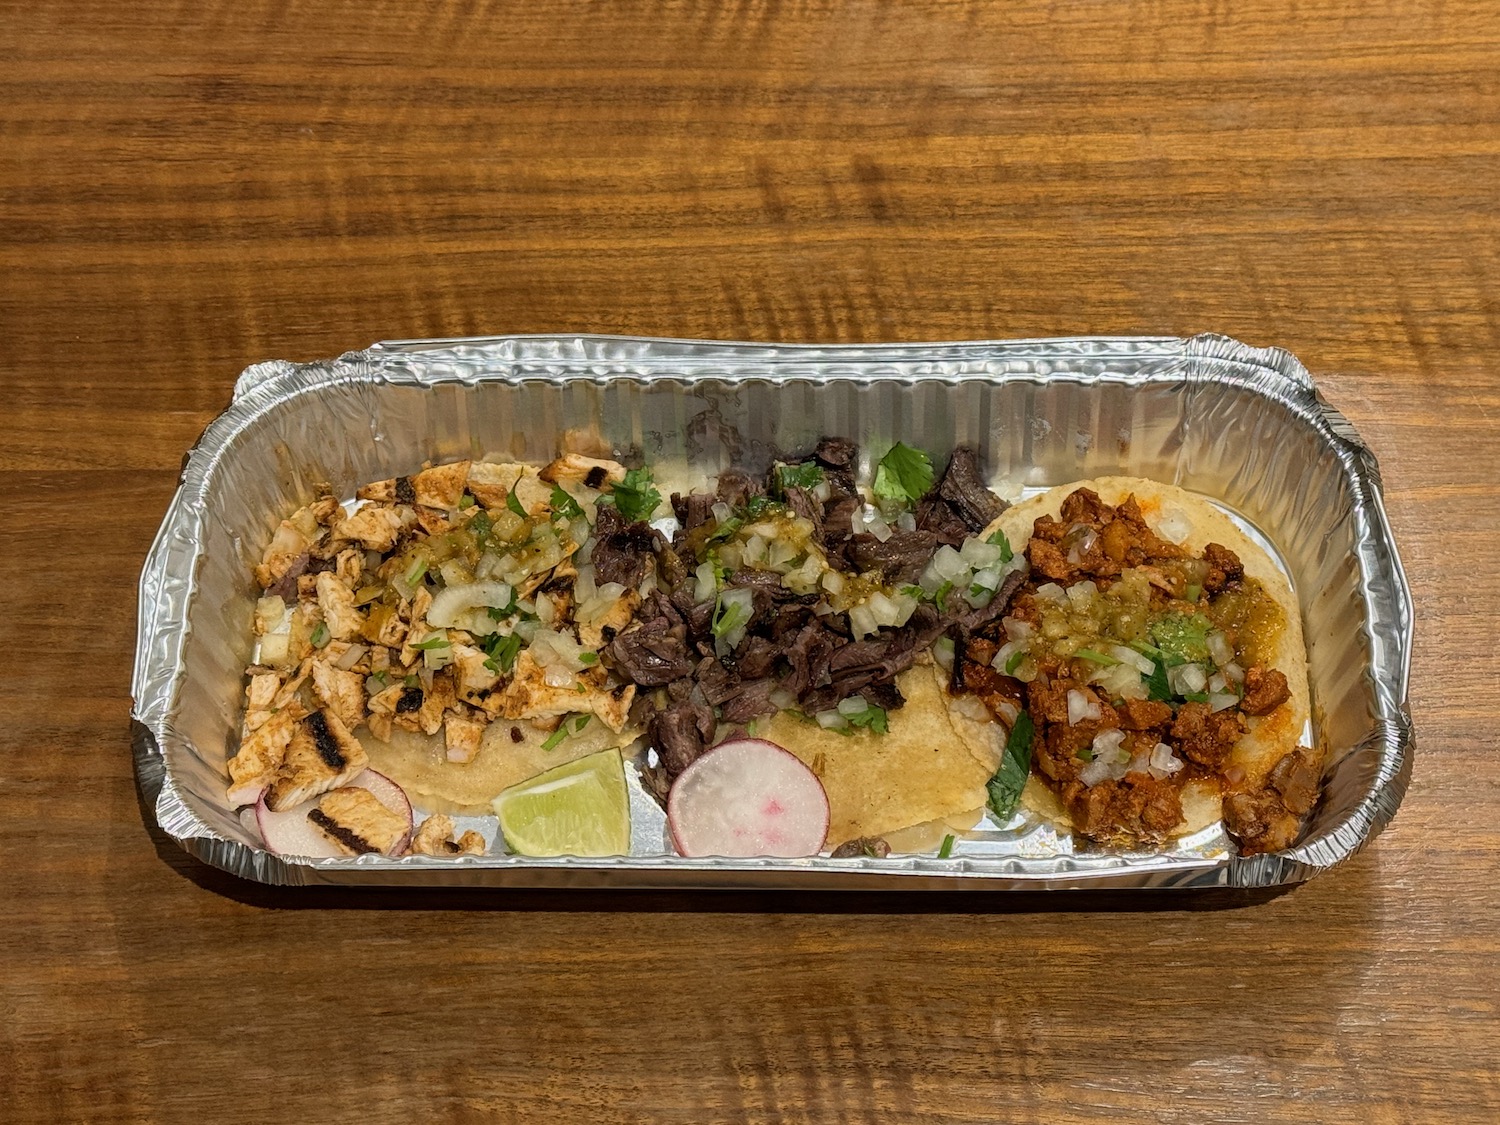 a tray of food on a table